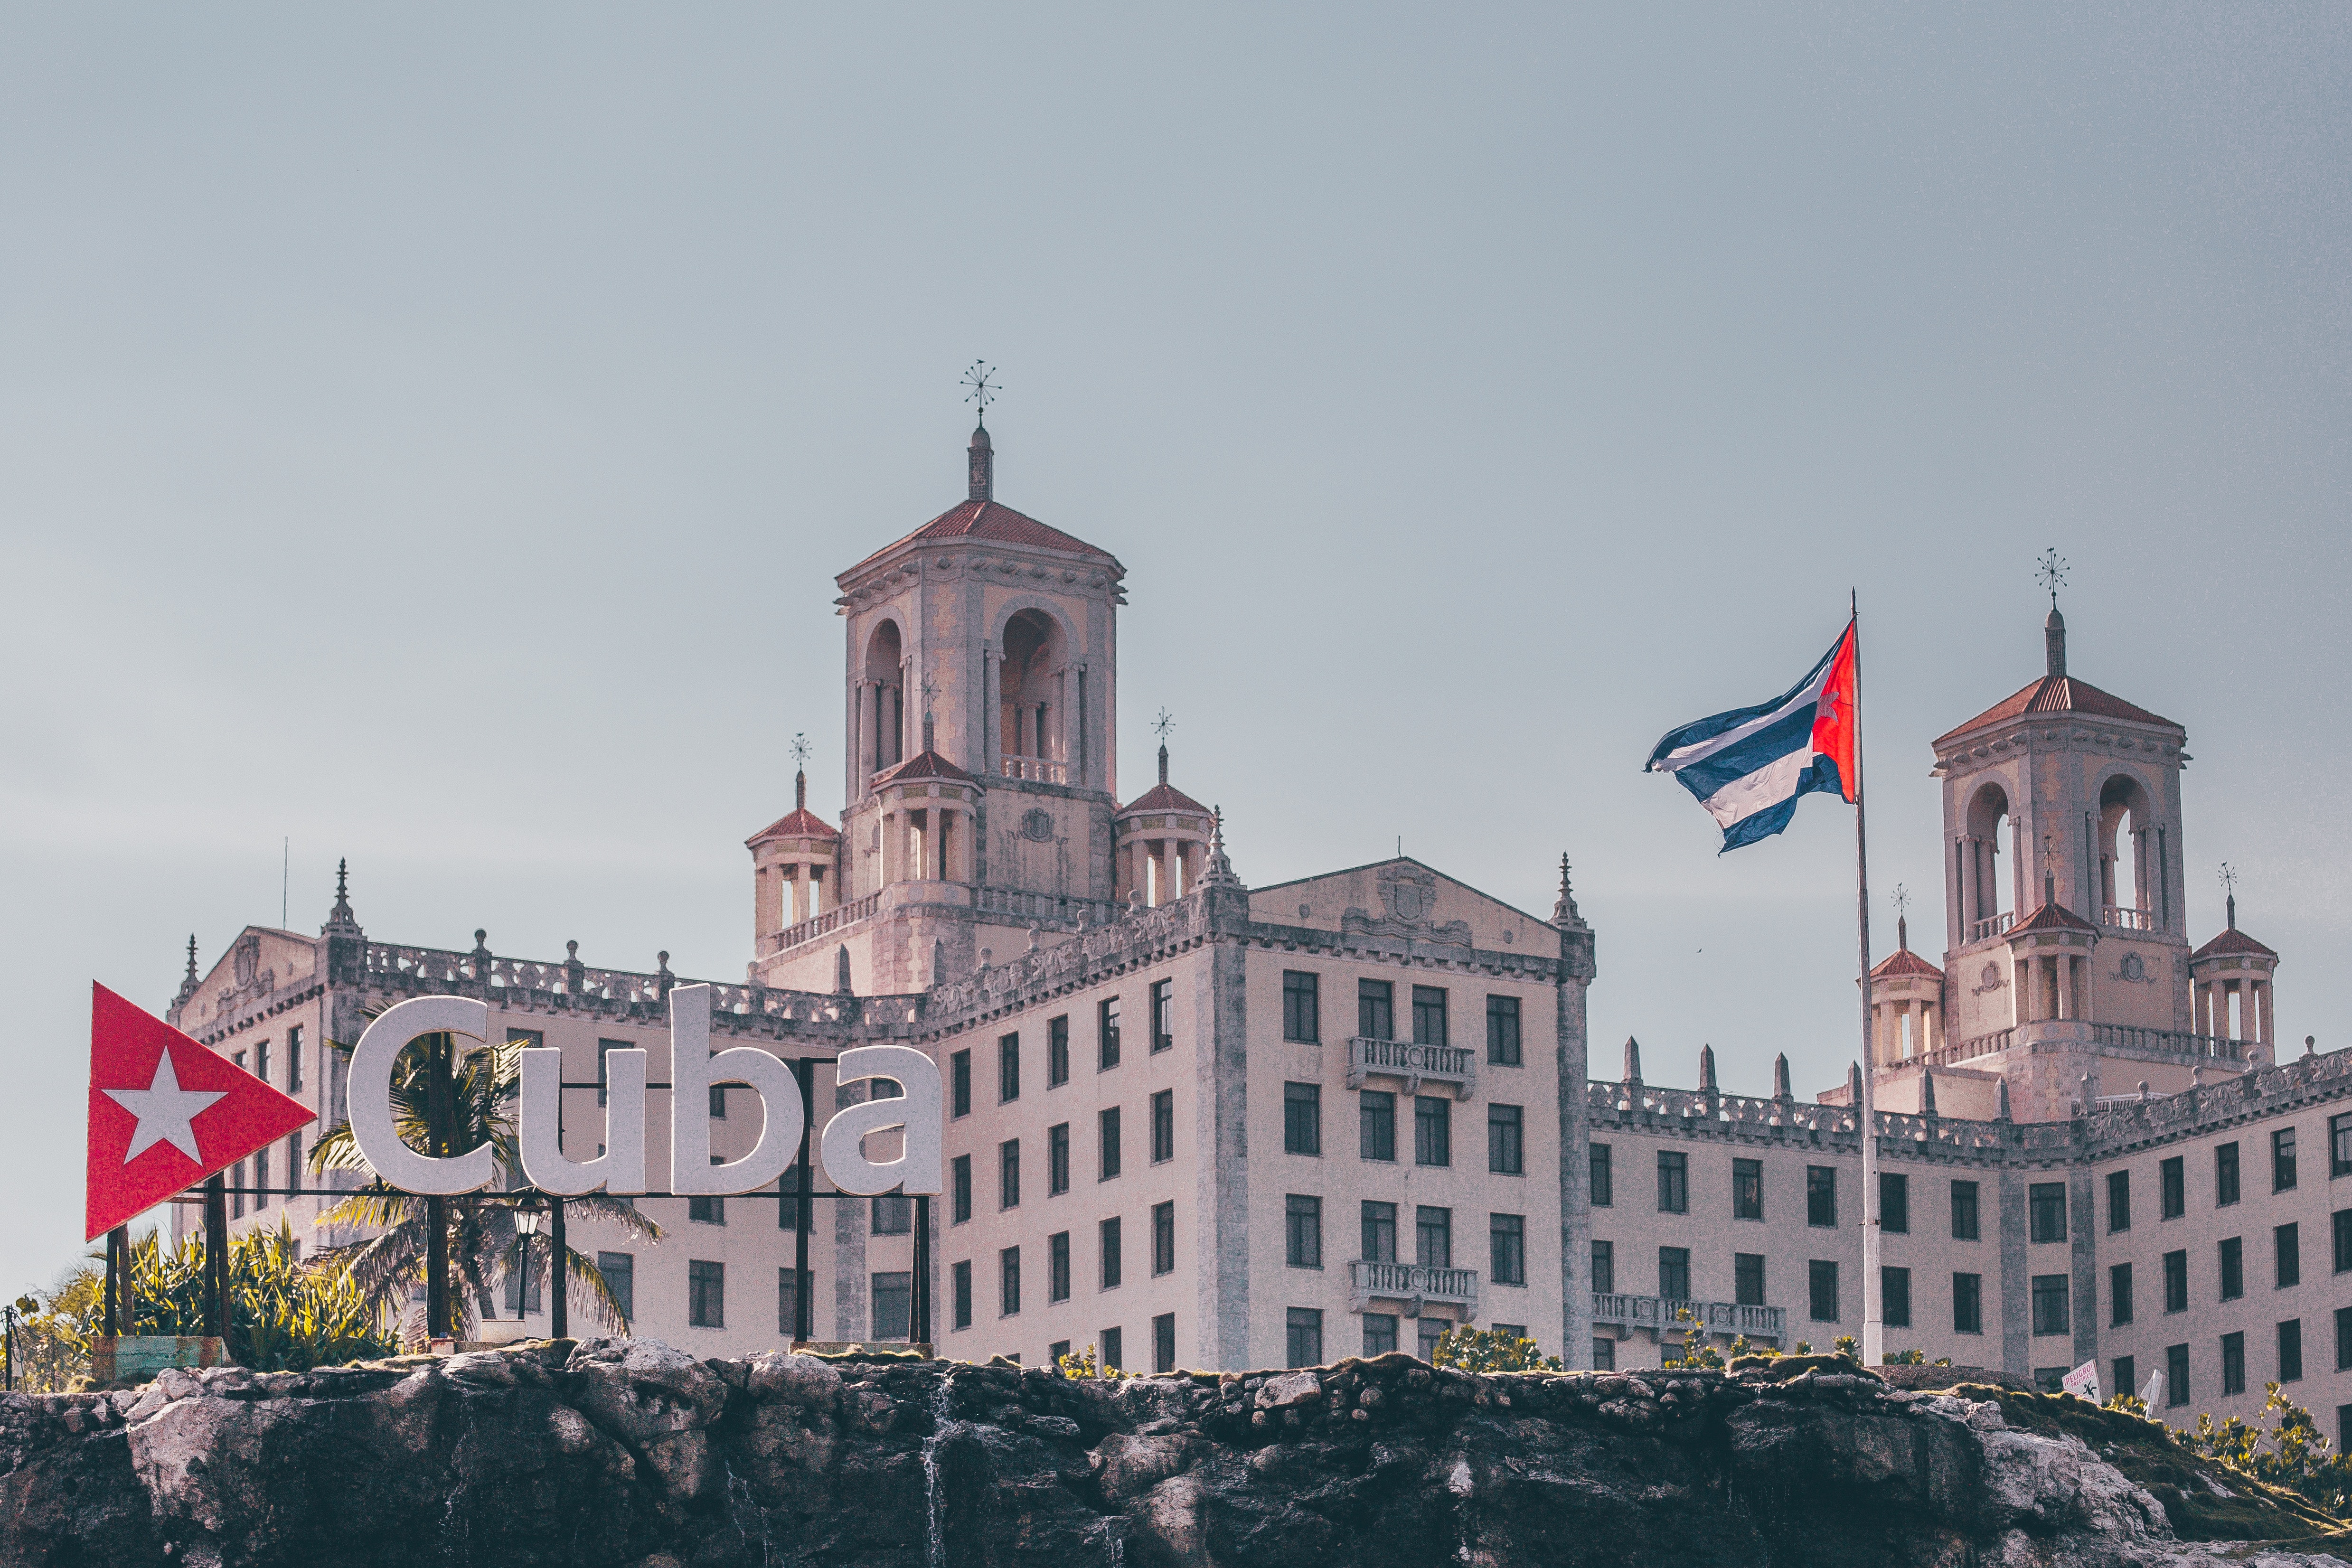 A larger building flies the Cuban flag. A sign in front says "Cuba" 